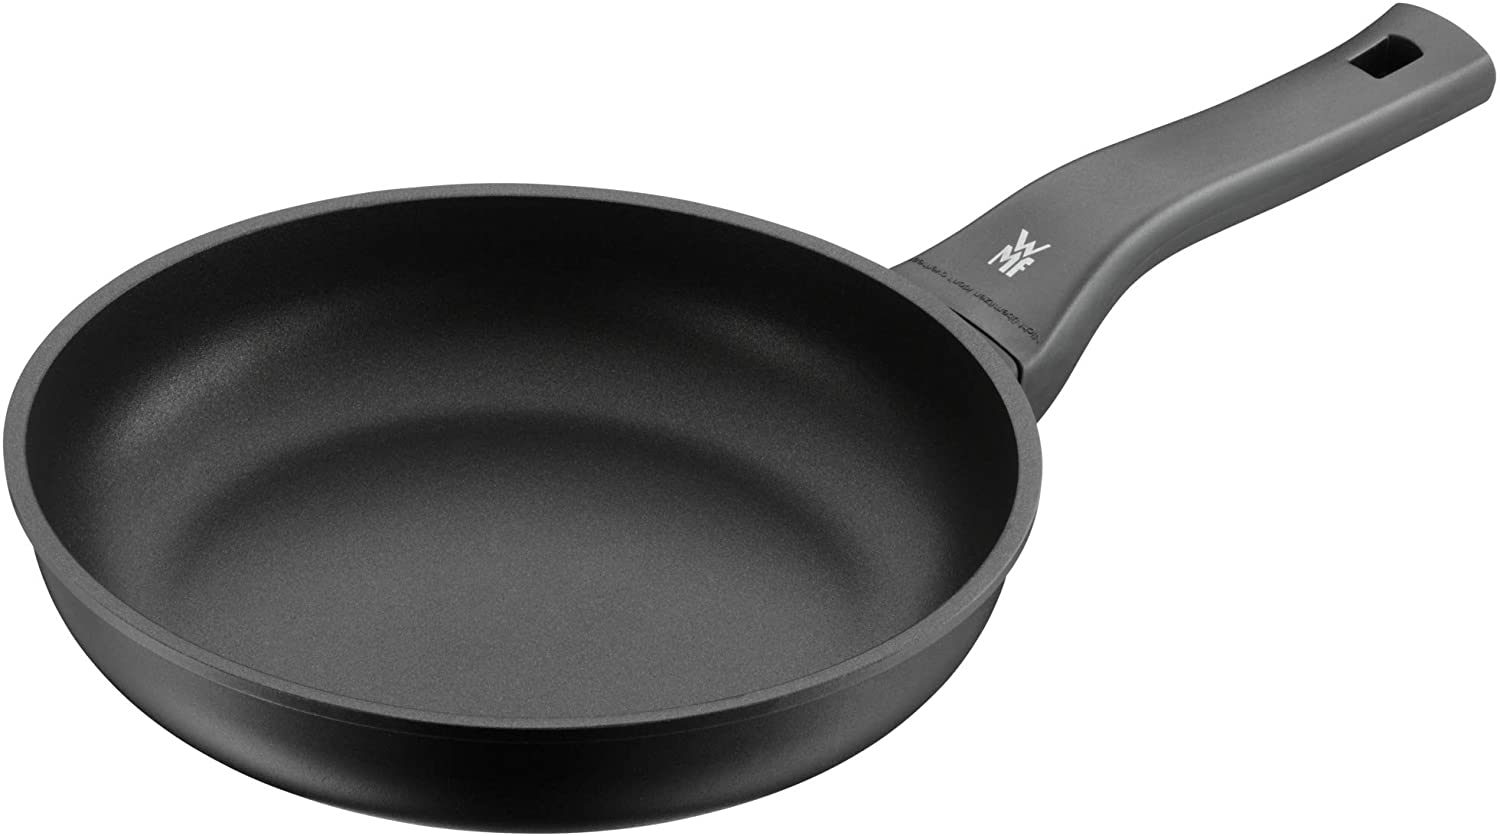 WMF PermaDur Excellent Induction Frying Pan 24 cm Aluminium Coated with Plastic Handle with Flame Retardant